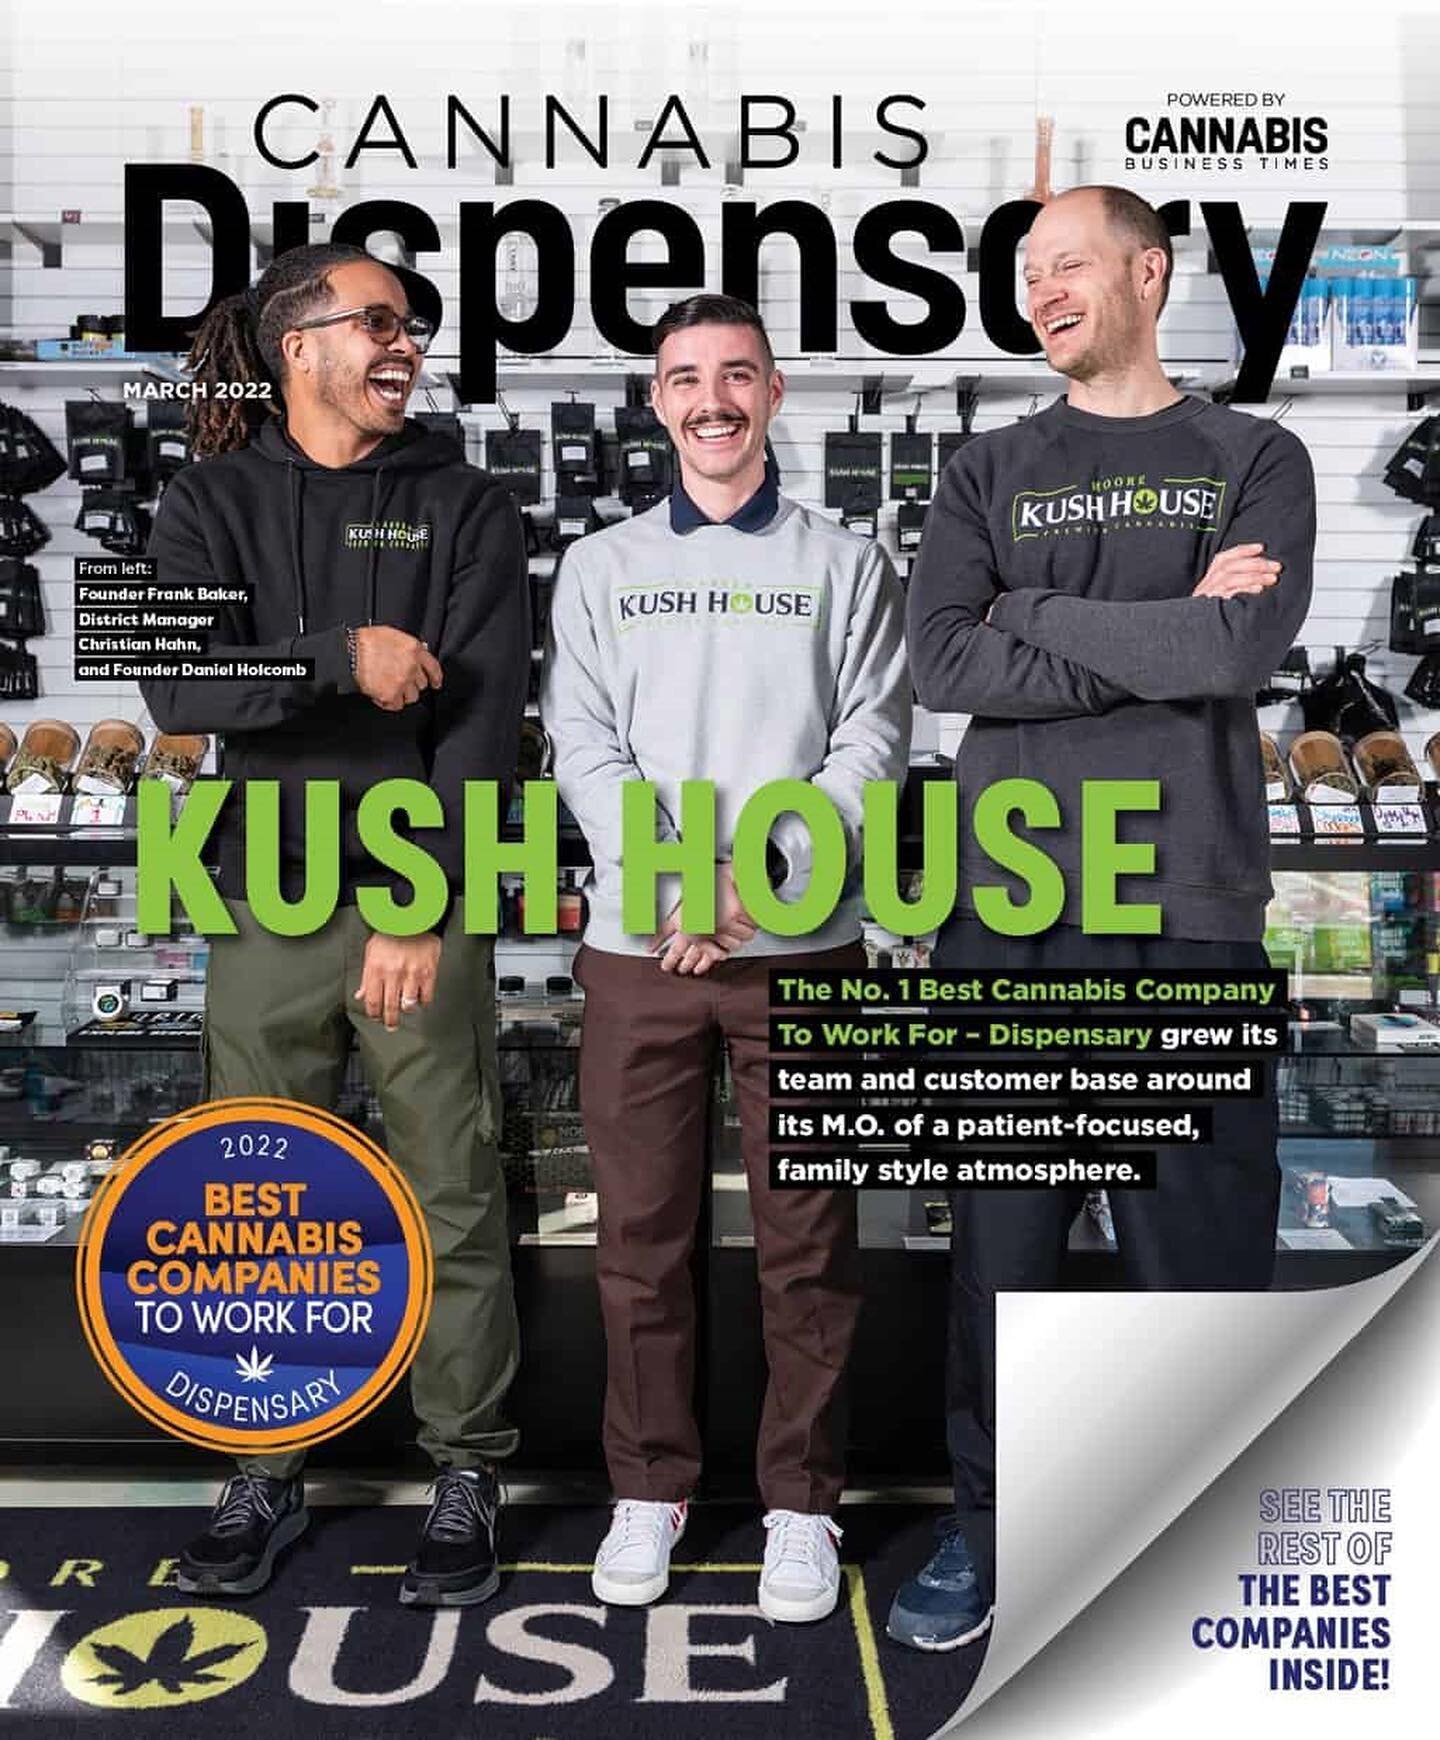 Check the cover story I shot for @cannabisbusinesstimes of @kushhouseoklahoma, the &ldquo;#1 Cannabis Business to Work For&rdquo;  according to a nationwide survey of cannabis retailers. Congrats!